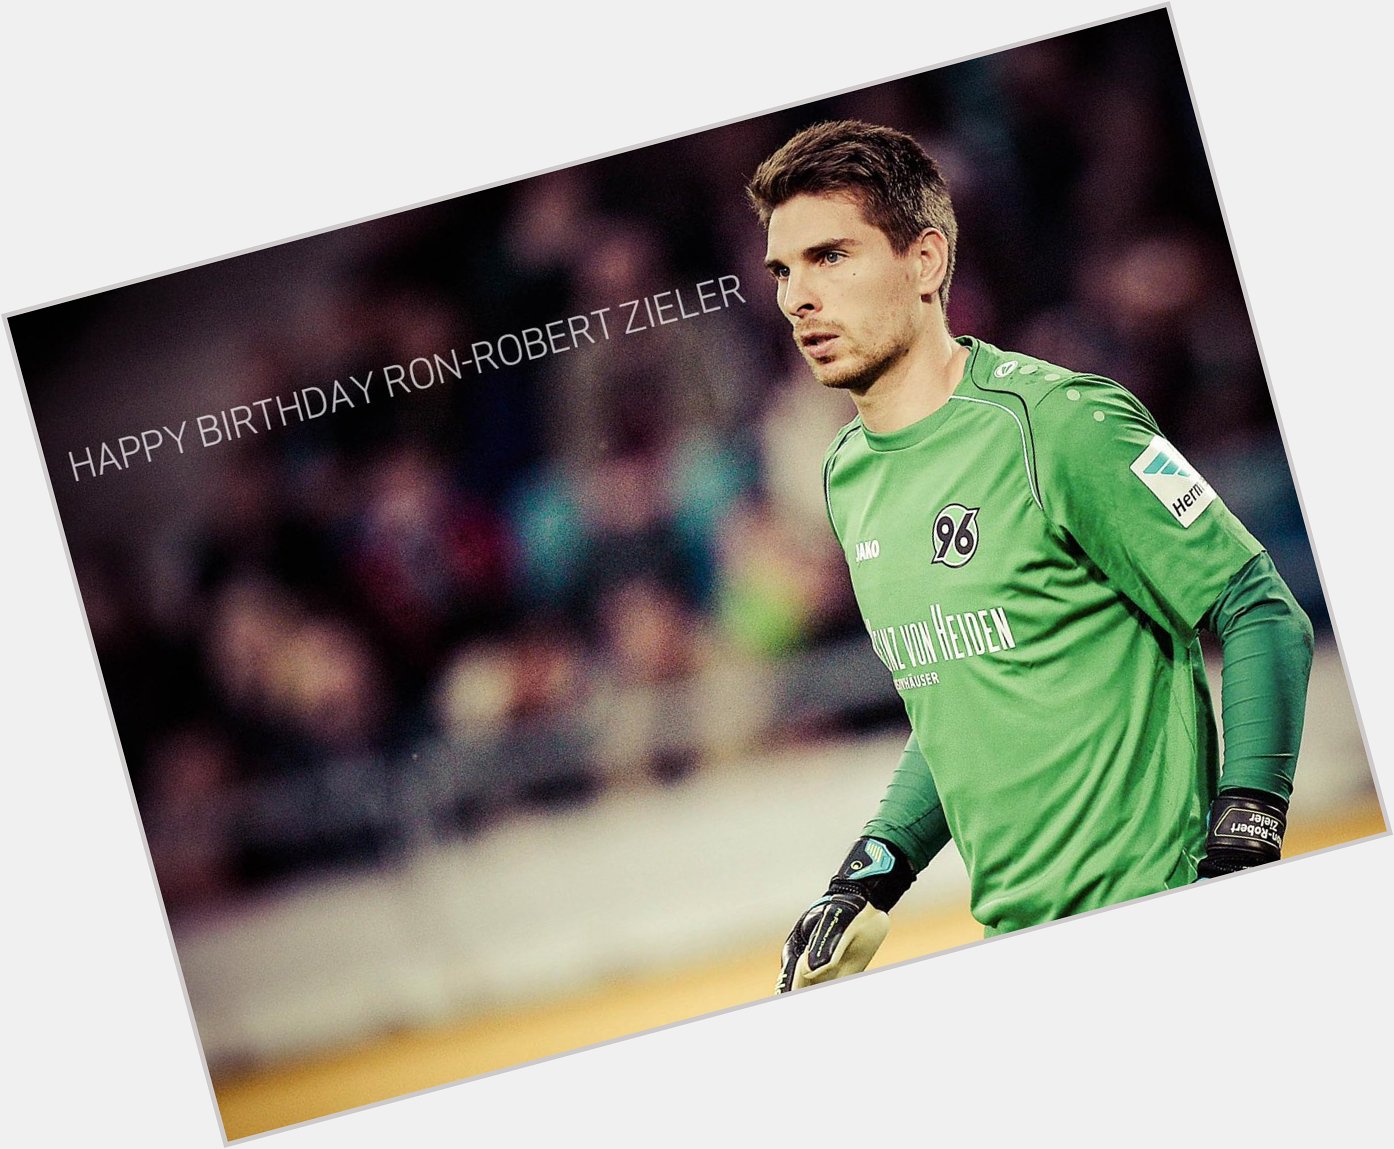 More greetings

And happy 26th birthday to and goalkeeper Ron-Robert Zieler 